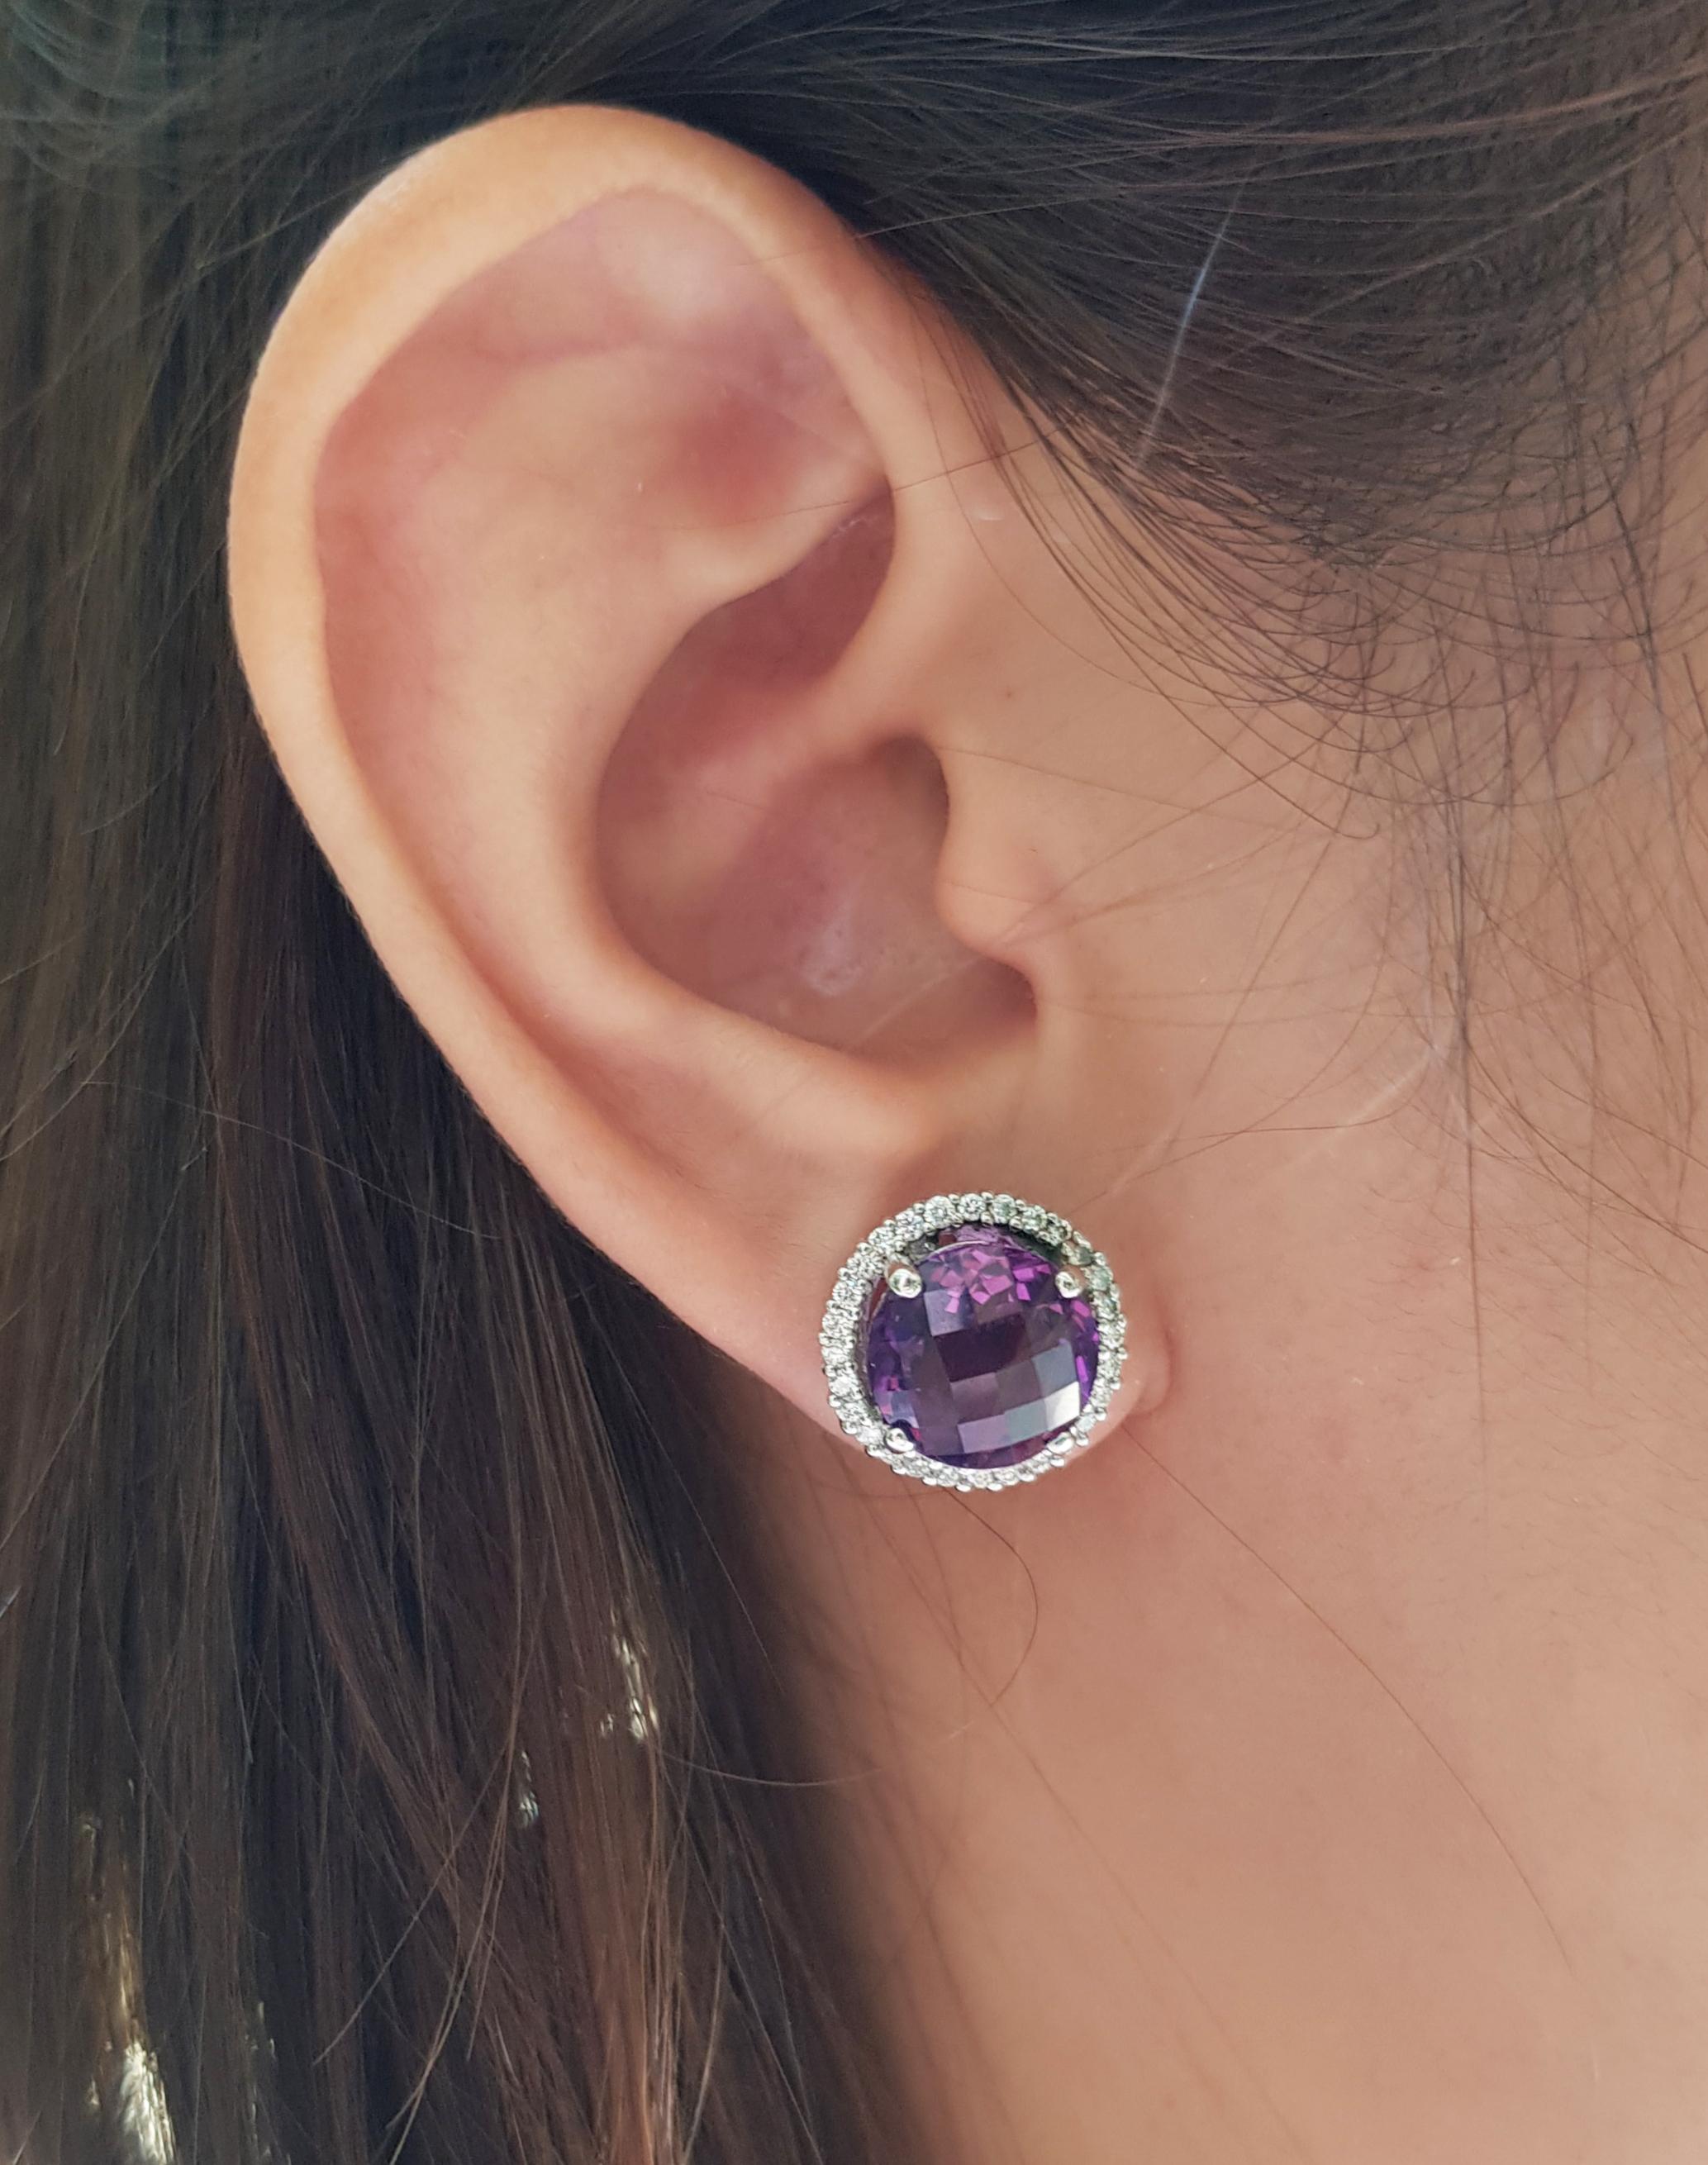 Amethyst 8.06 carats with Diamond 0.52 carat Earrings set in 18 Karat White Gold Settings

Width:  1.4 cm 
Length: 1.4 cm
Total Weight: 8.59 grams

